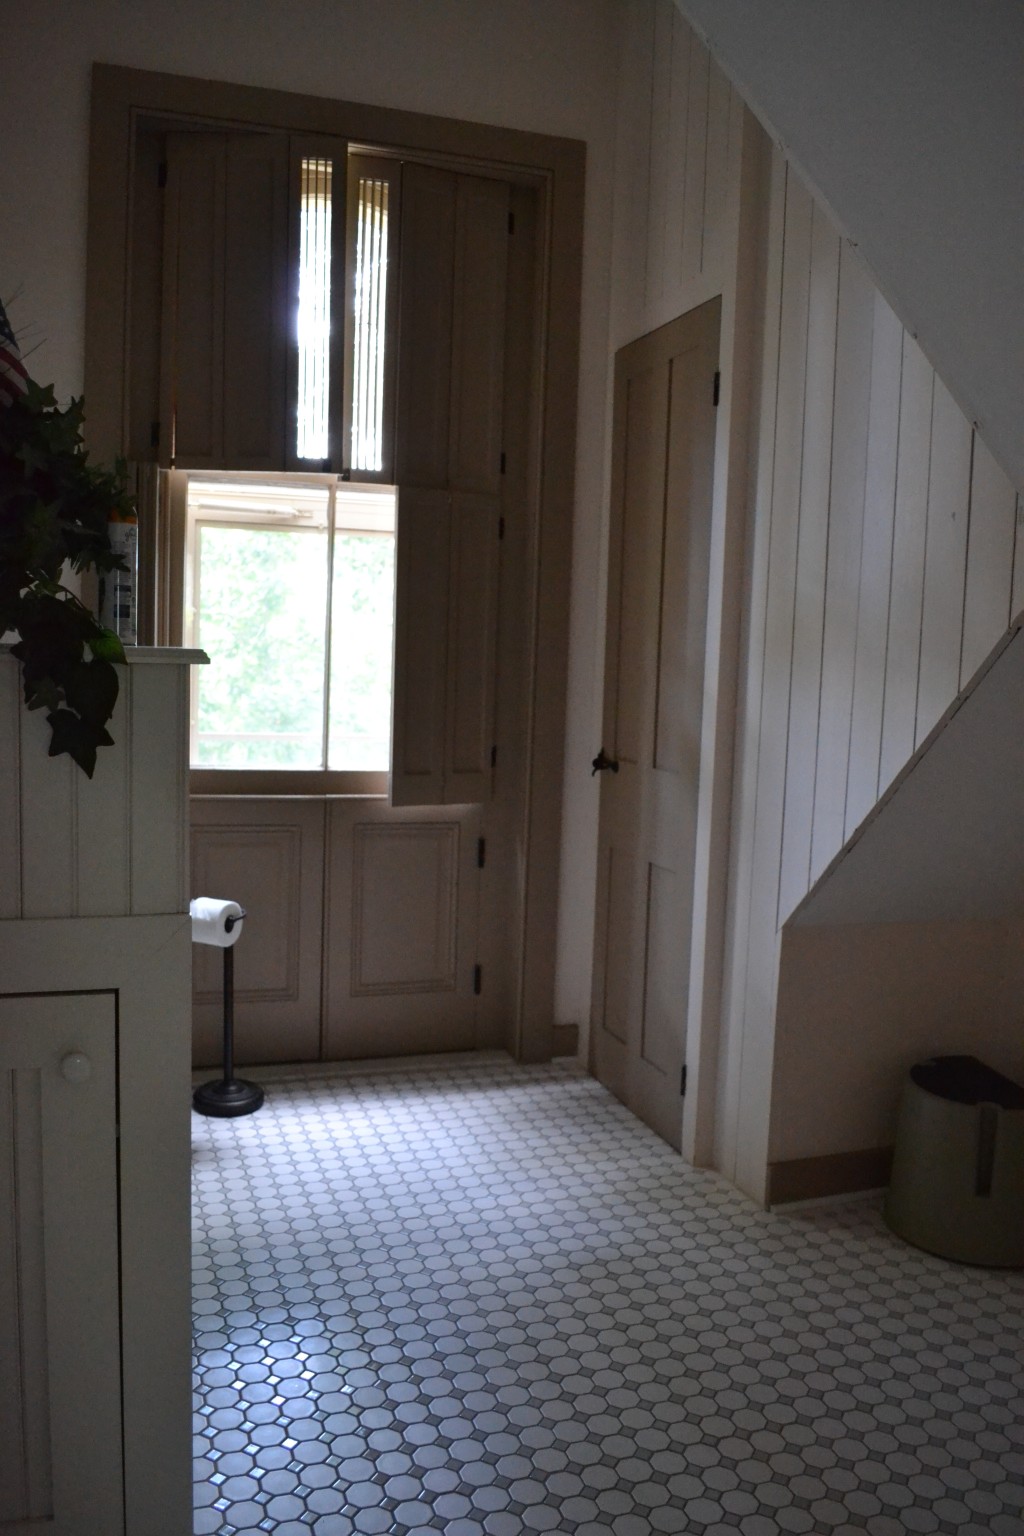 The third-floor bathroom, with its little door accessing the cupola.